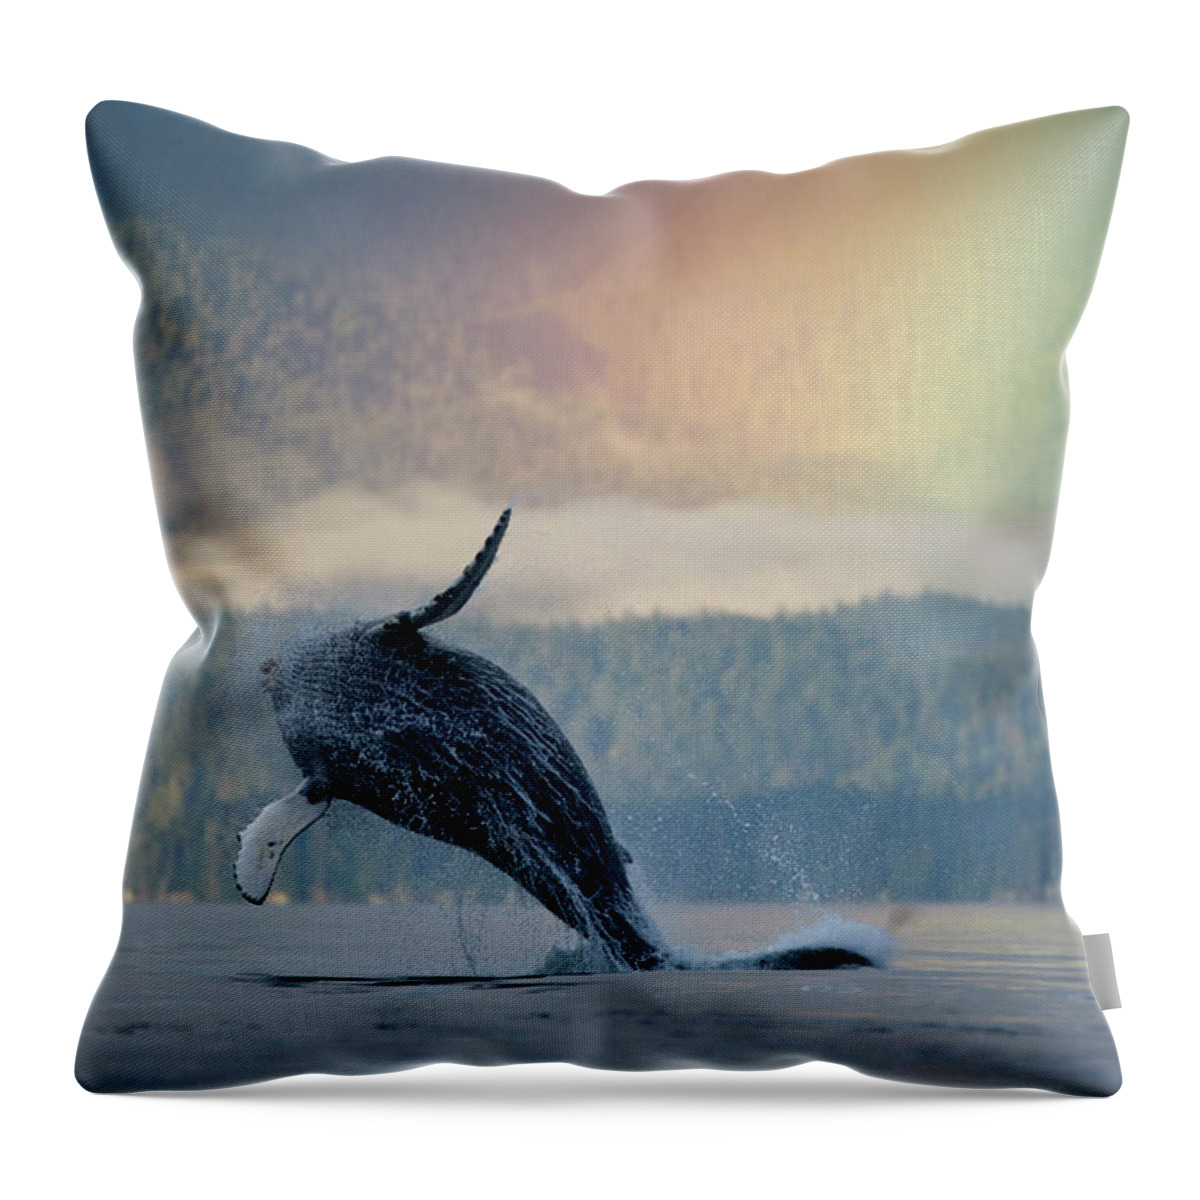 Animal Themes Throw Pillow featuring the photograph Breaching Humpback Whale And Rainbow by Paul Souders